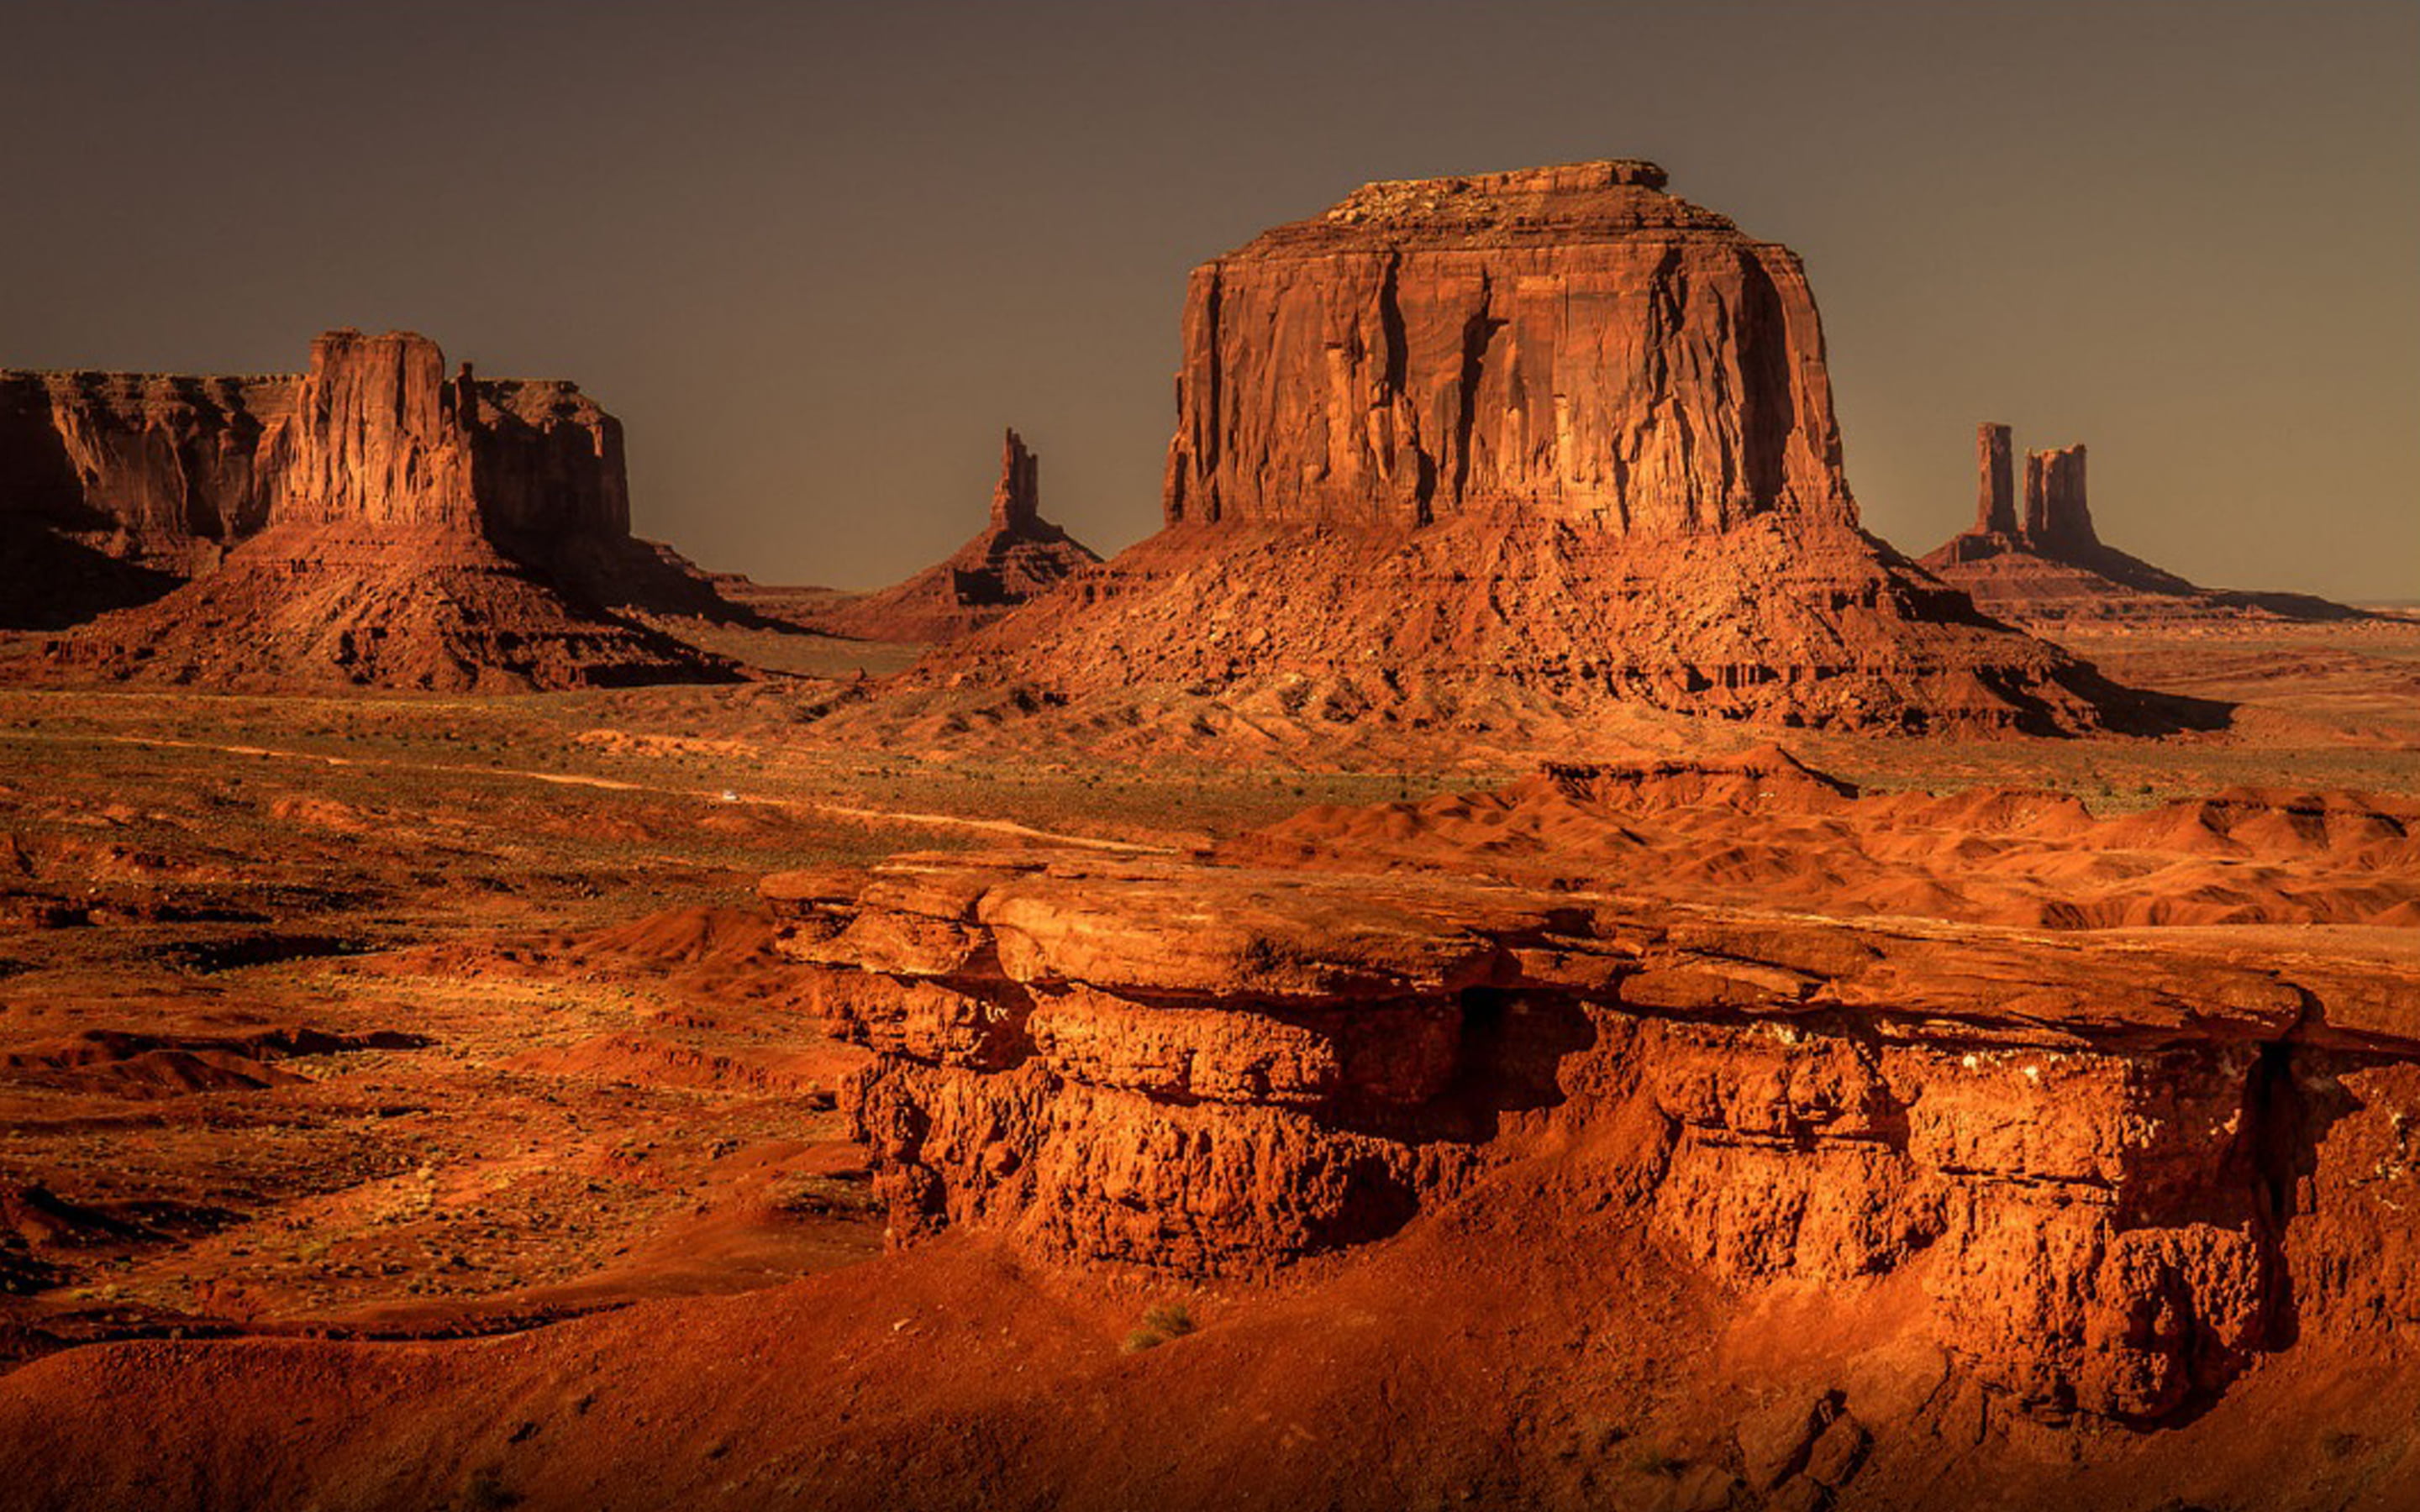 Monument Valley Navajo Tribal Park One Of The Most Magnificent And Most Photographed Places On Earth